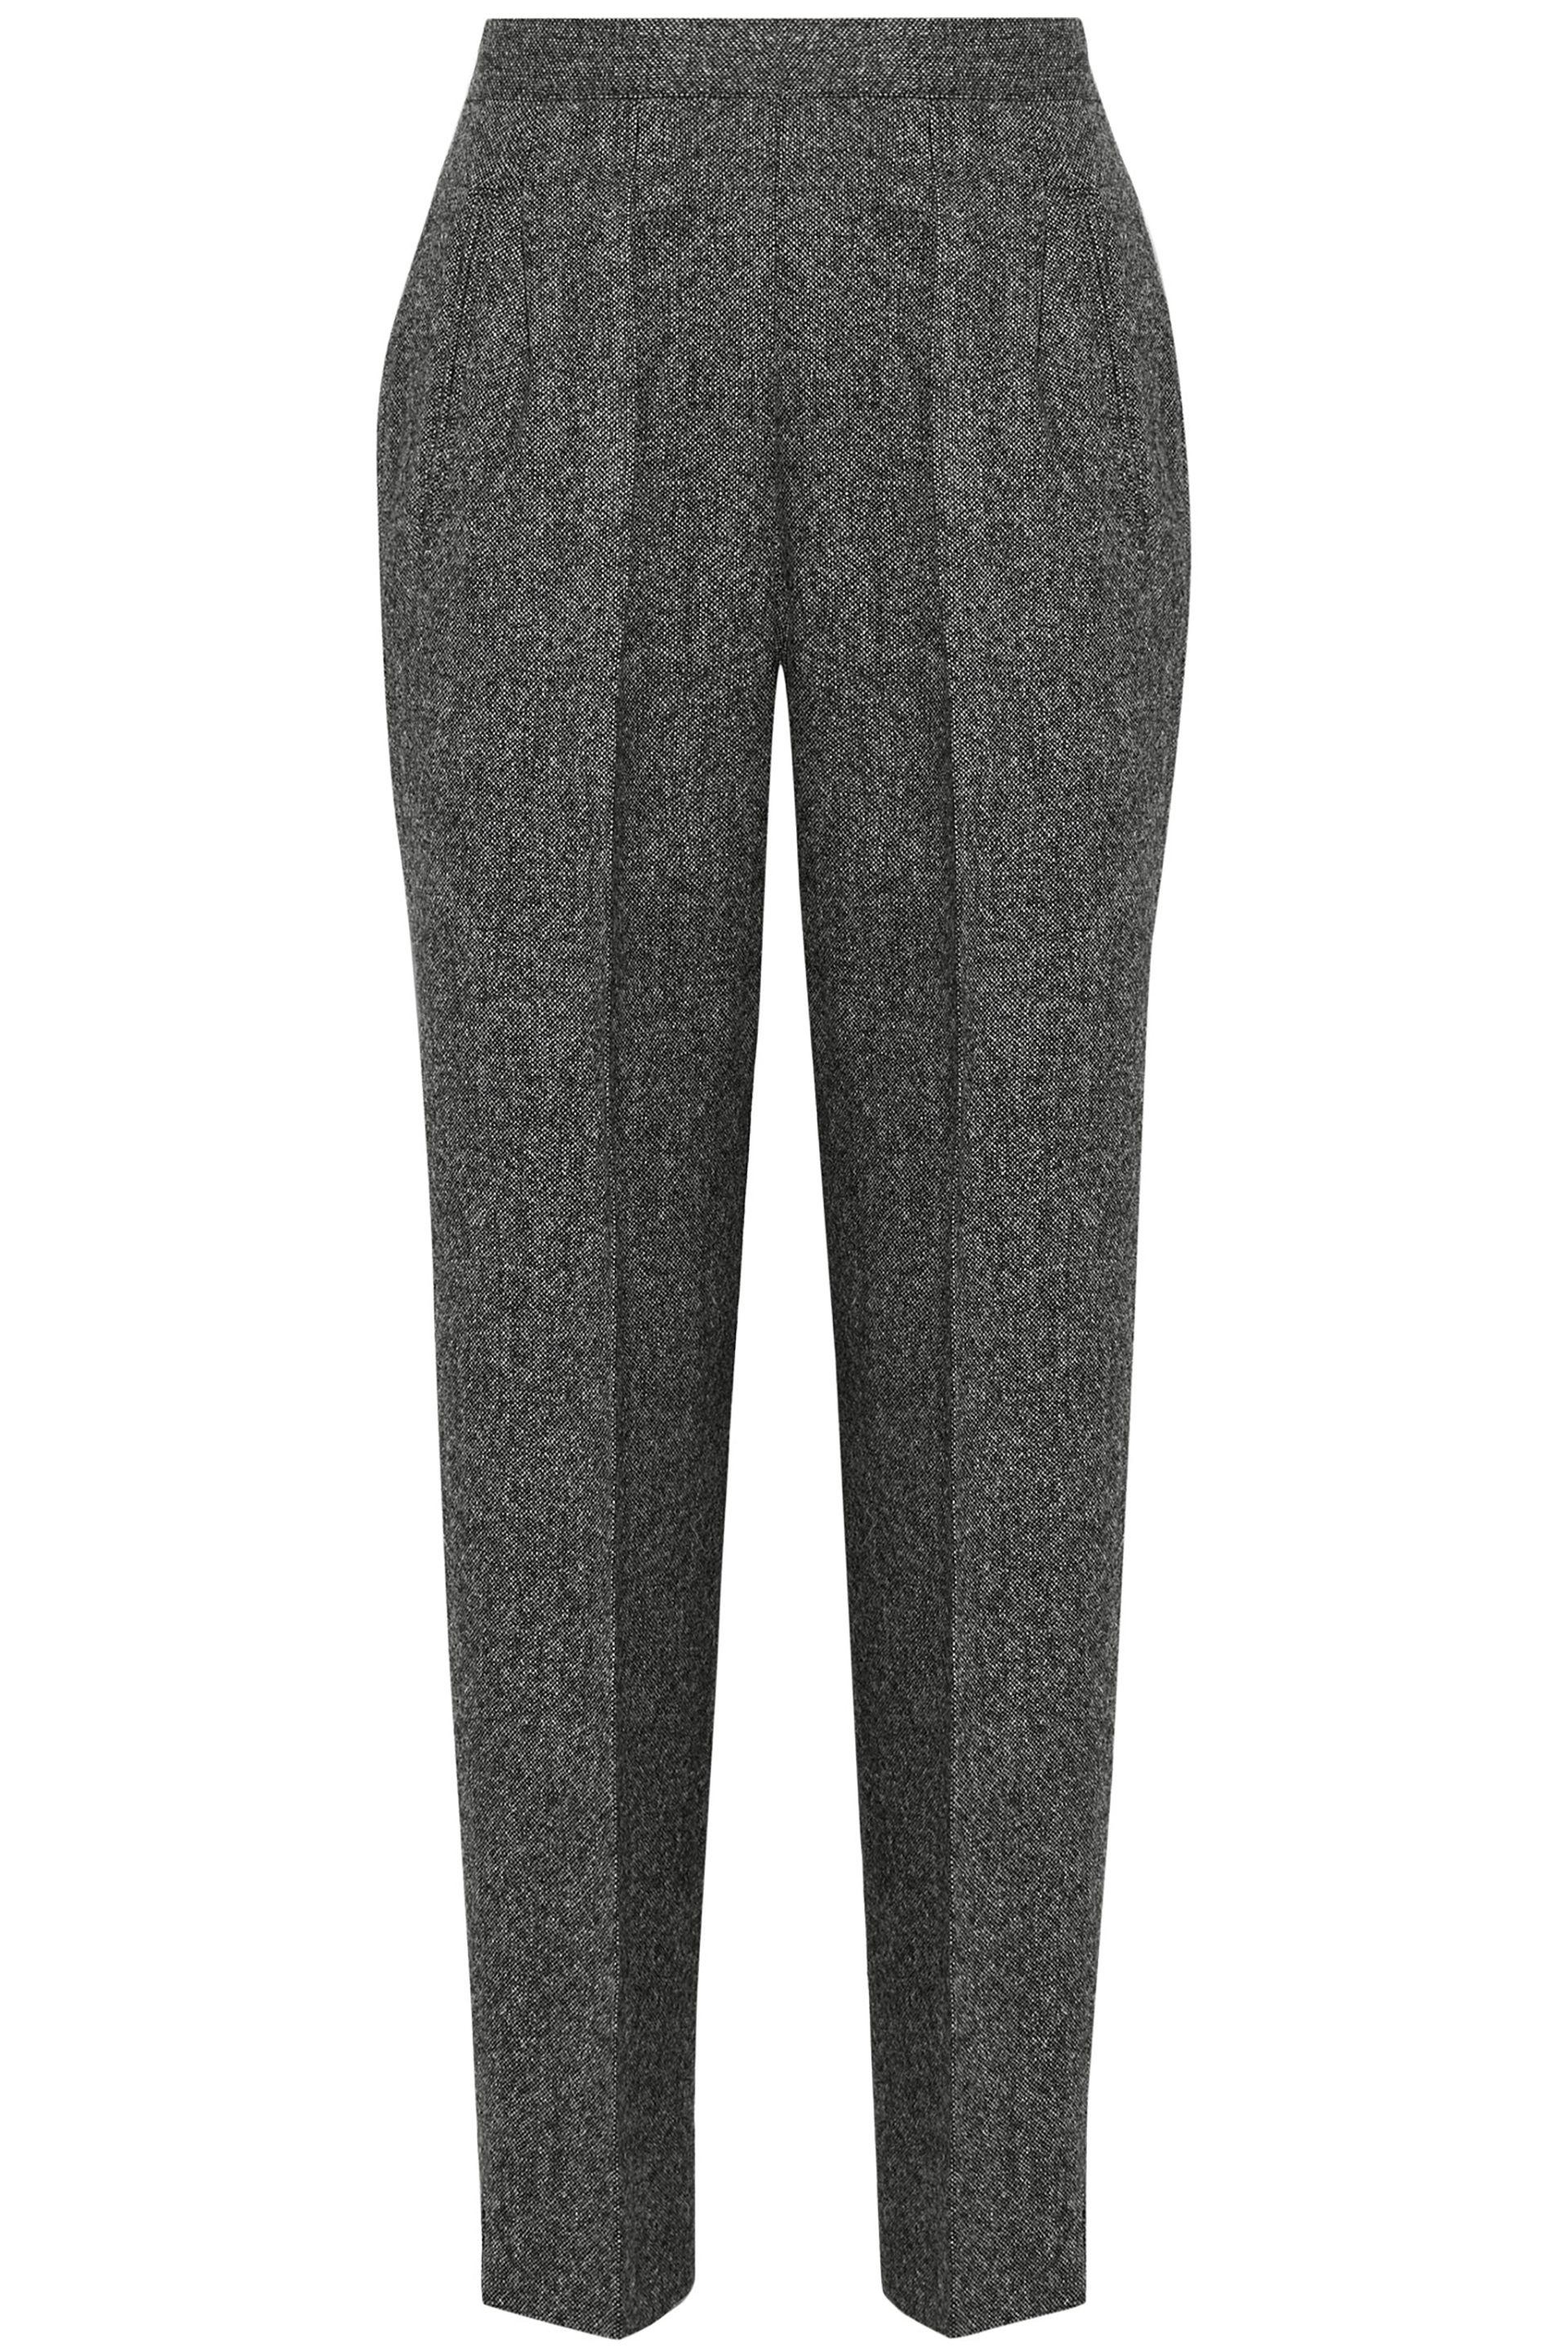 MM6 by Maison Martin Margiela Cropped Wool Tapered Pants Charcoal in ...